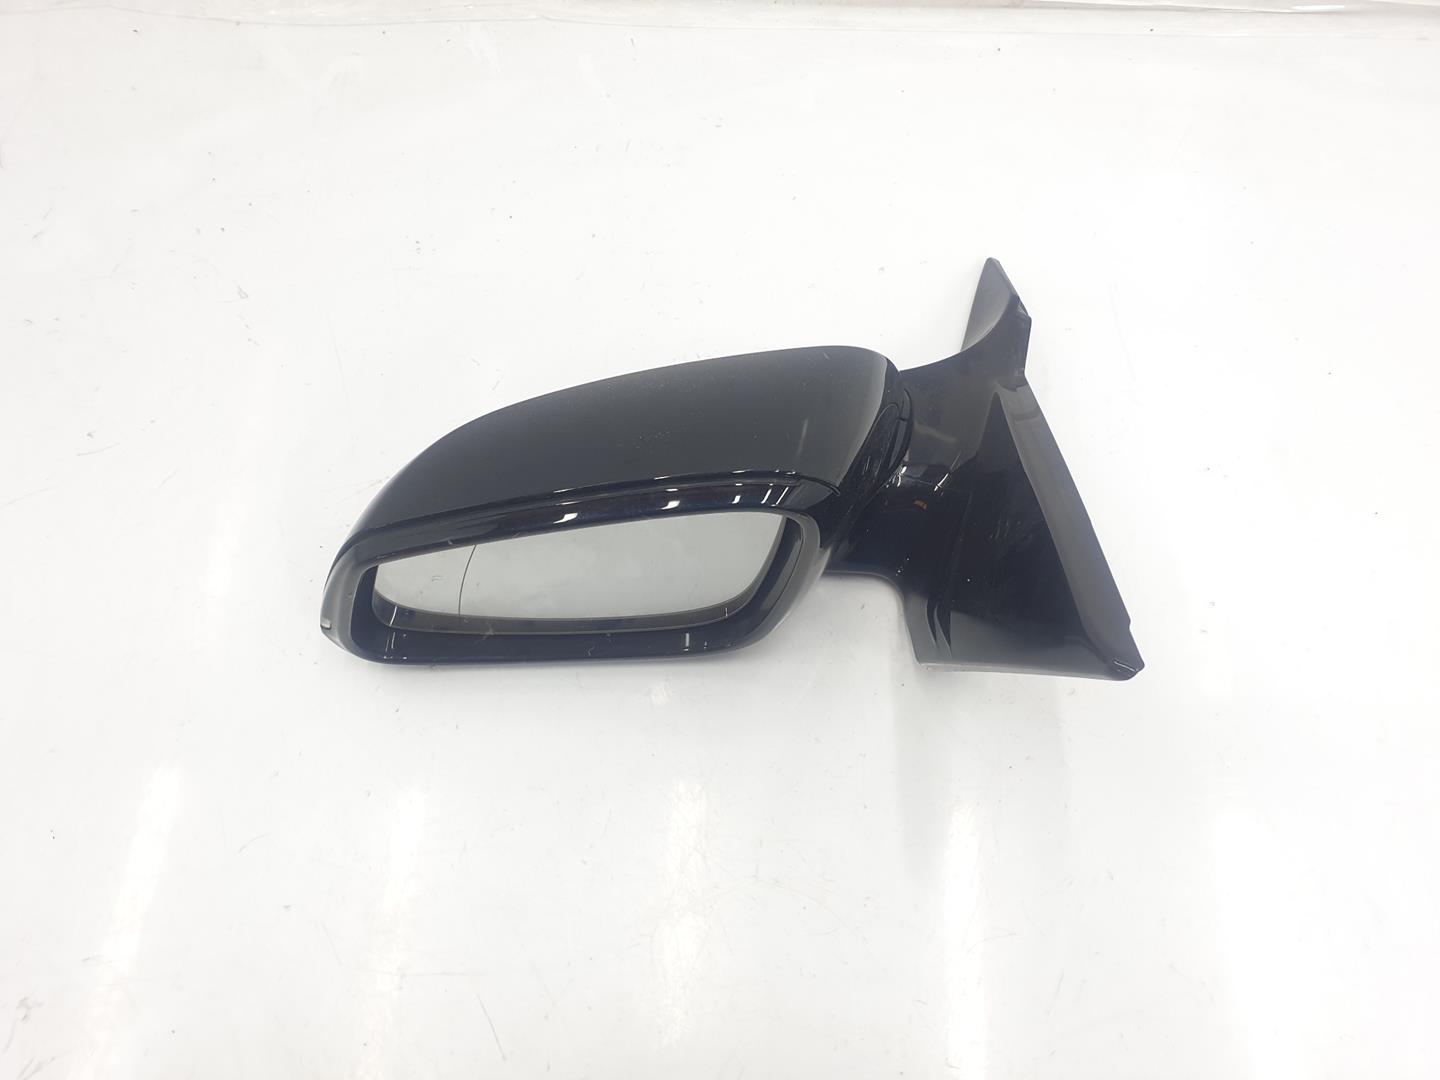 BMW 2 Series F22/F23 (2013-2020) Left Side Wing Mirror 51167268609, 51167268609, COLORNEGRO475 19833600